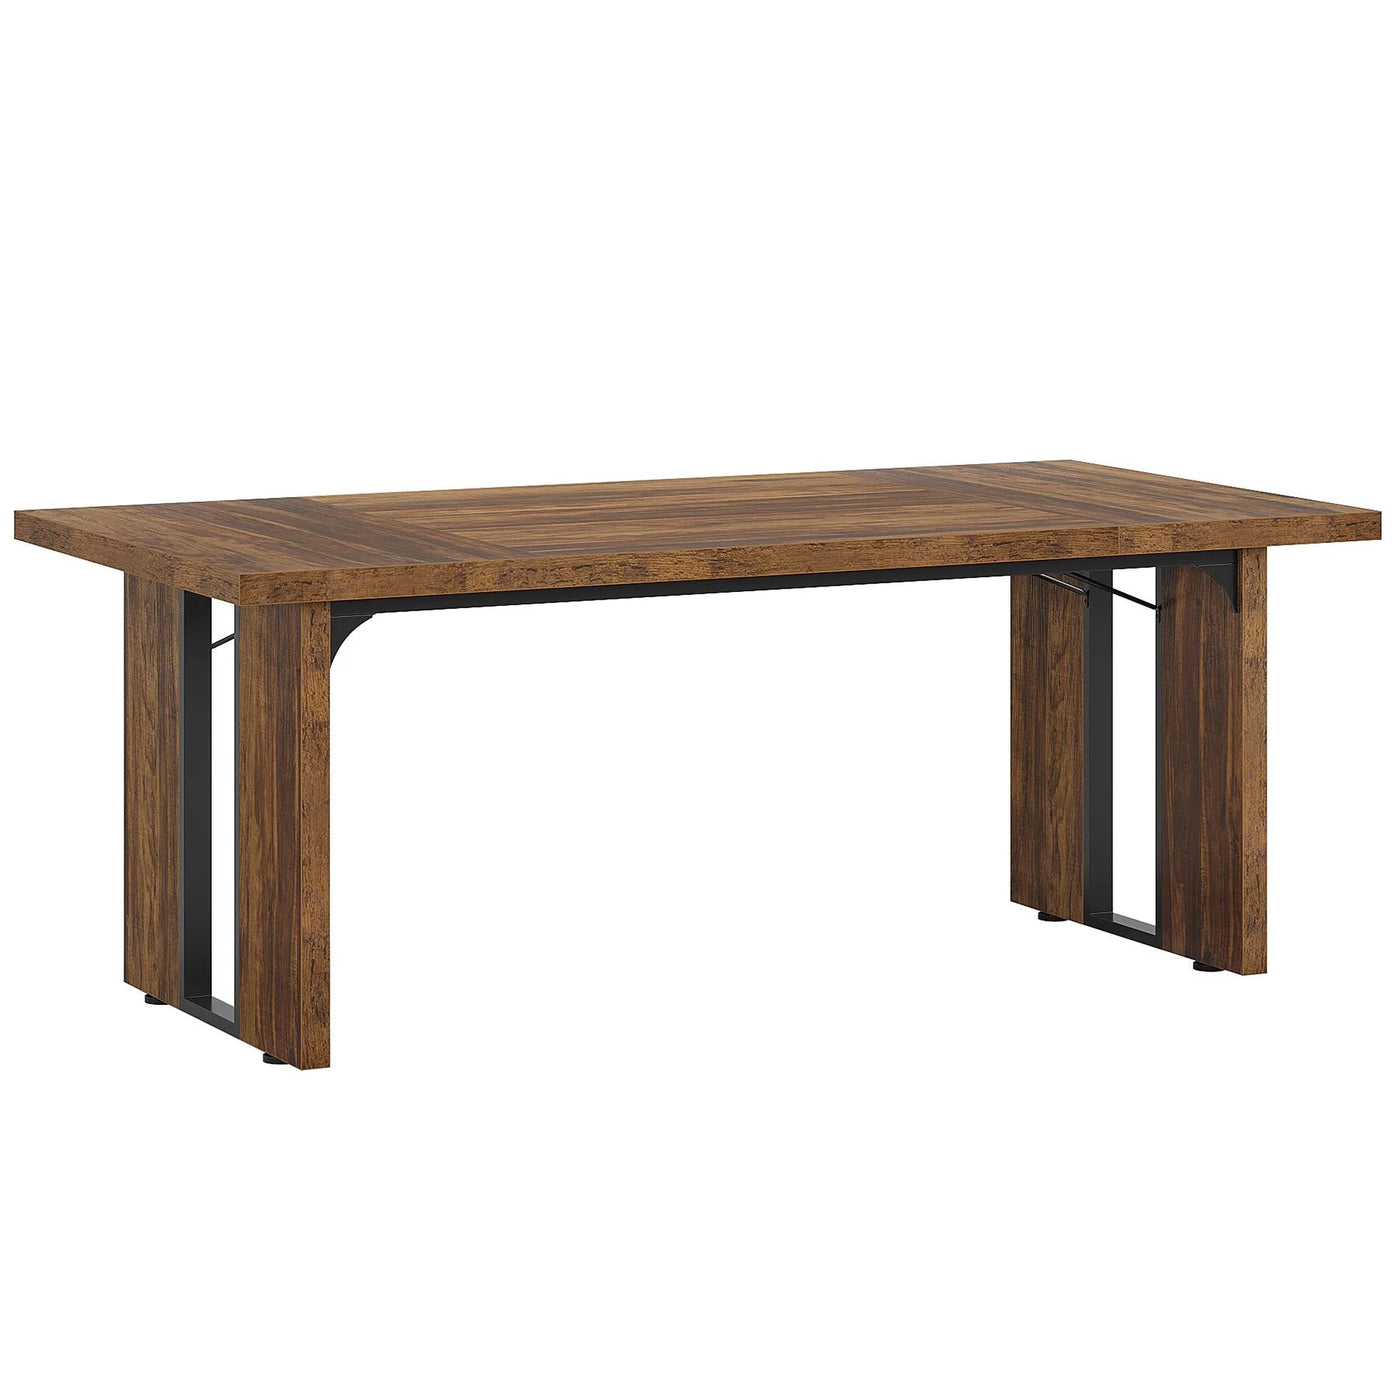 Parkville Rectangular Dining Table | Farmhouse Wooden Breakfast Table for 6 to 8 People